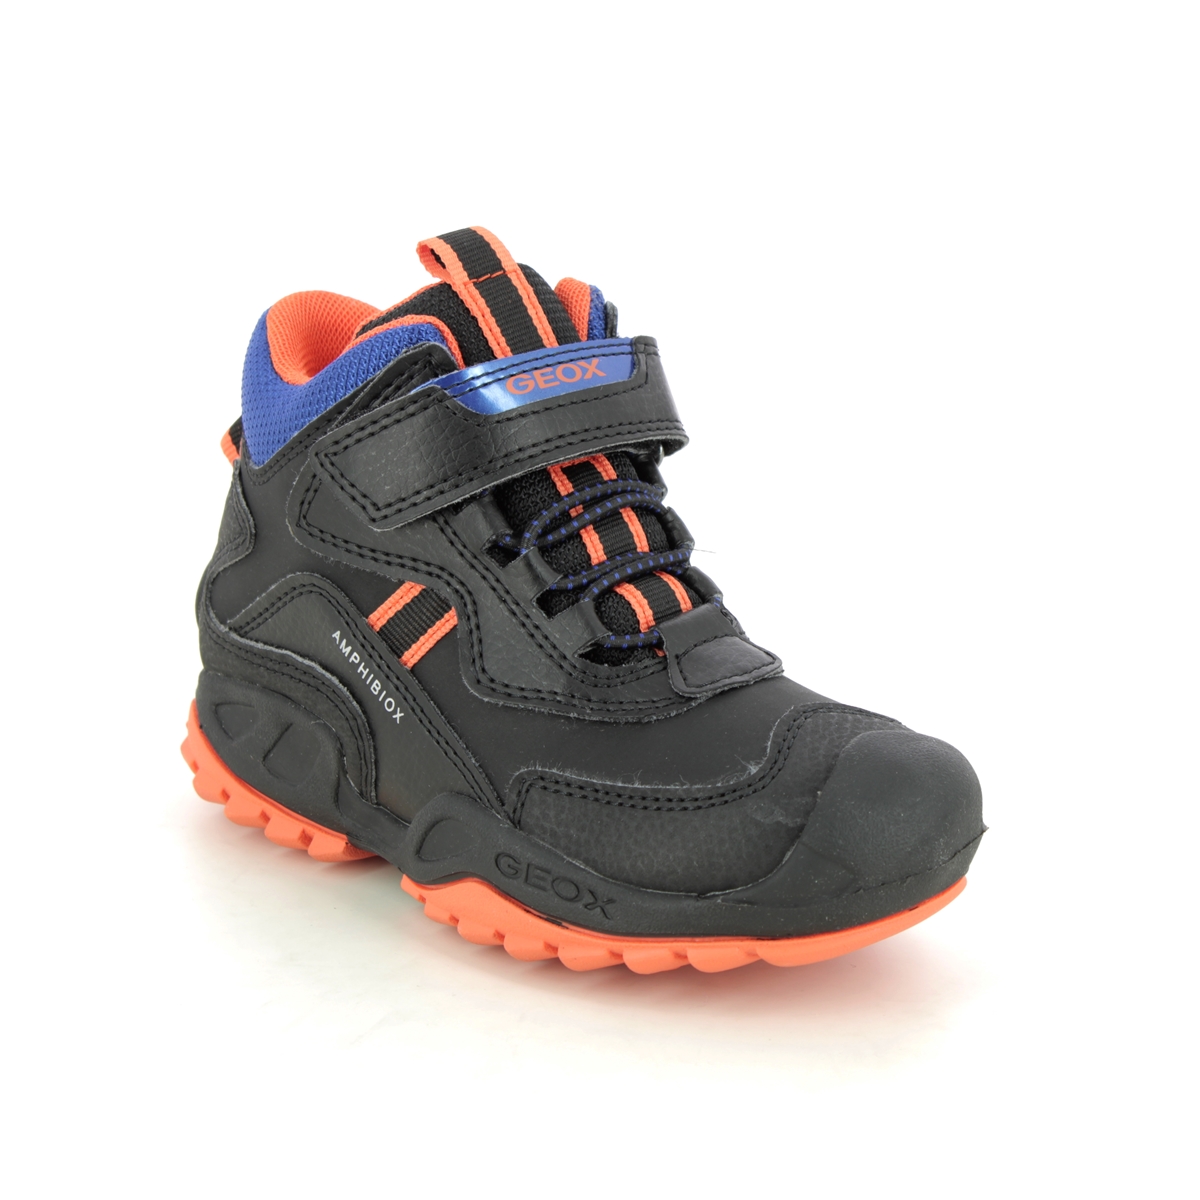 Geox - Savage Boot Tex (Black) J261Wb-C0399 In Size 34 In Plain Black For School For kids